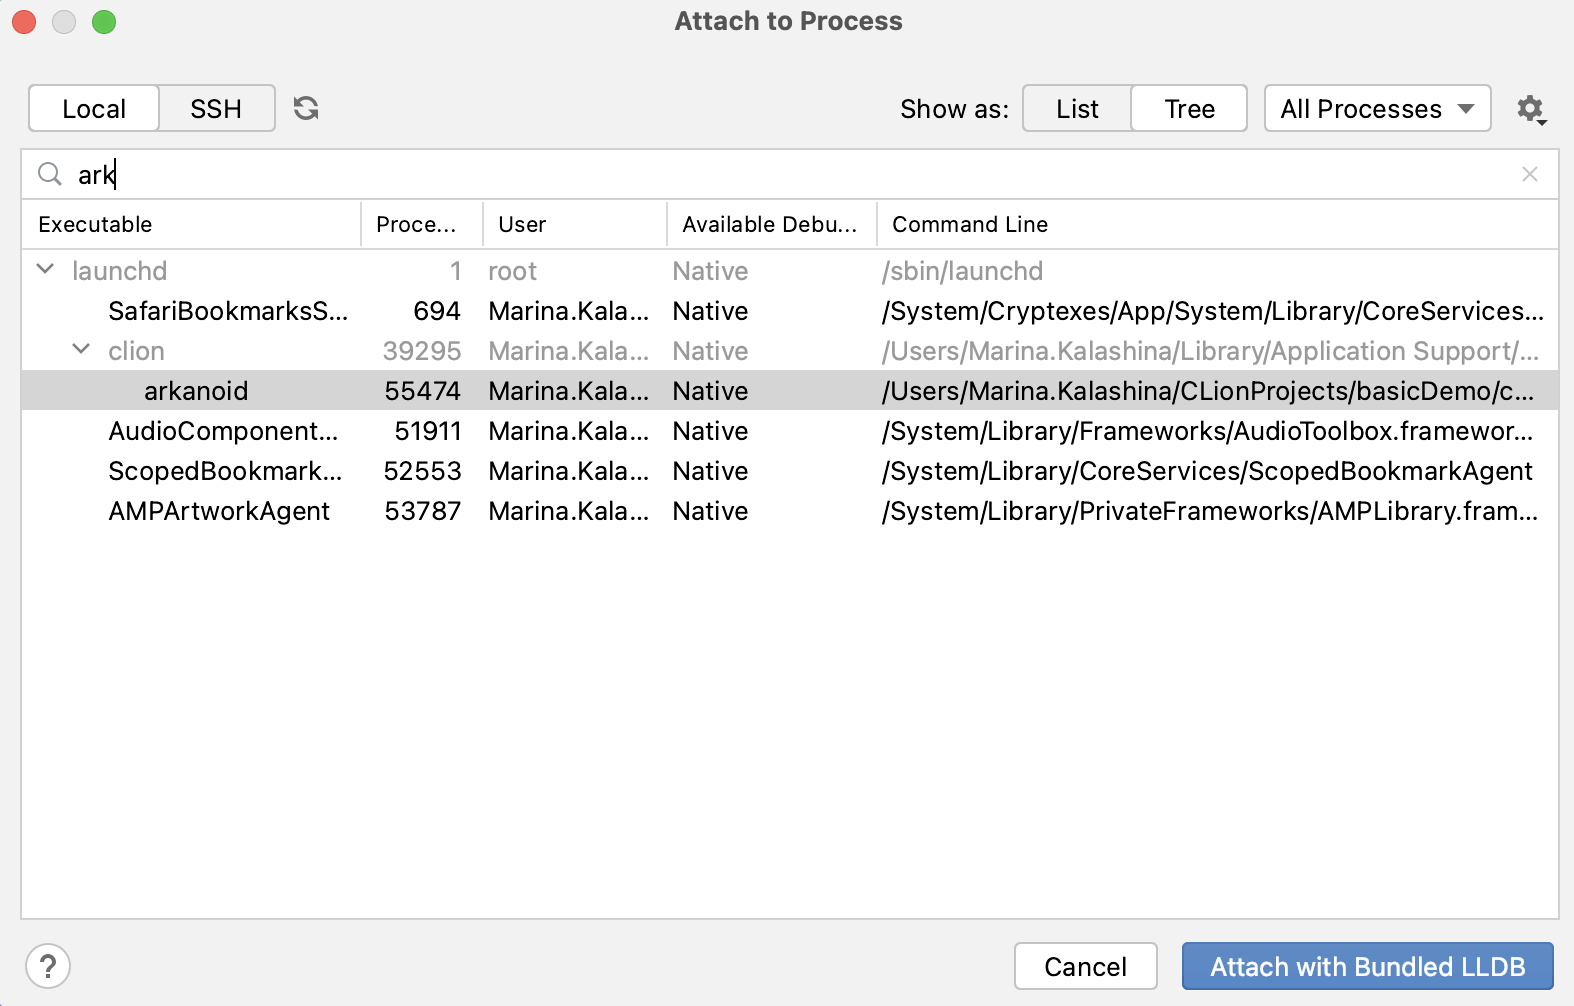 Searching in the Attach to Process dialog